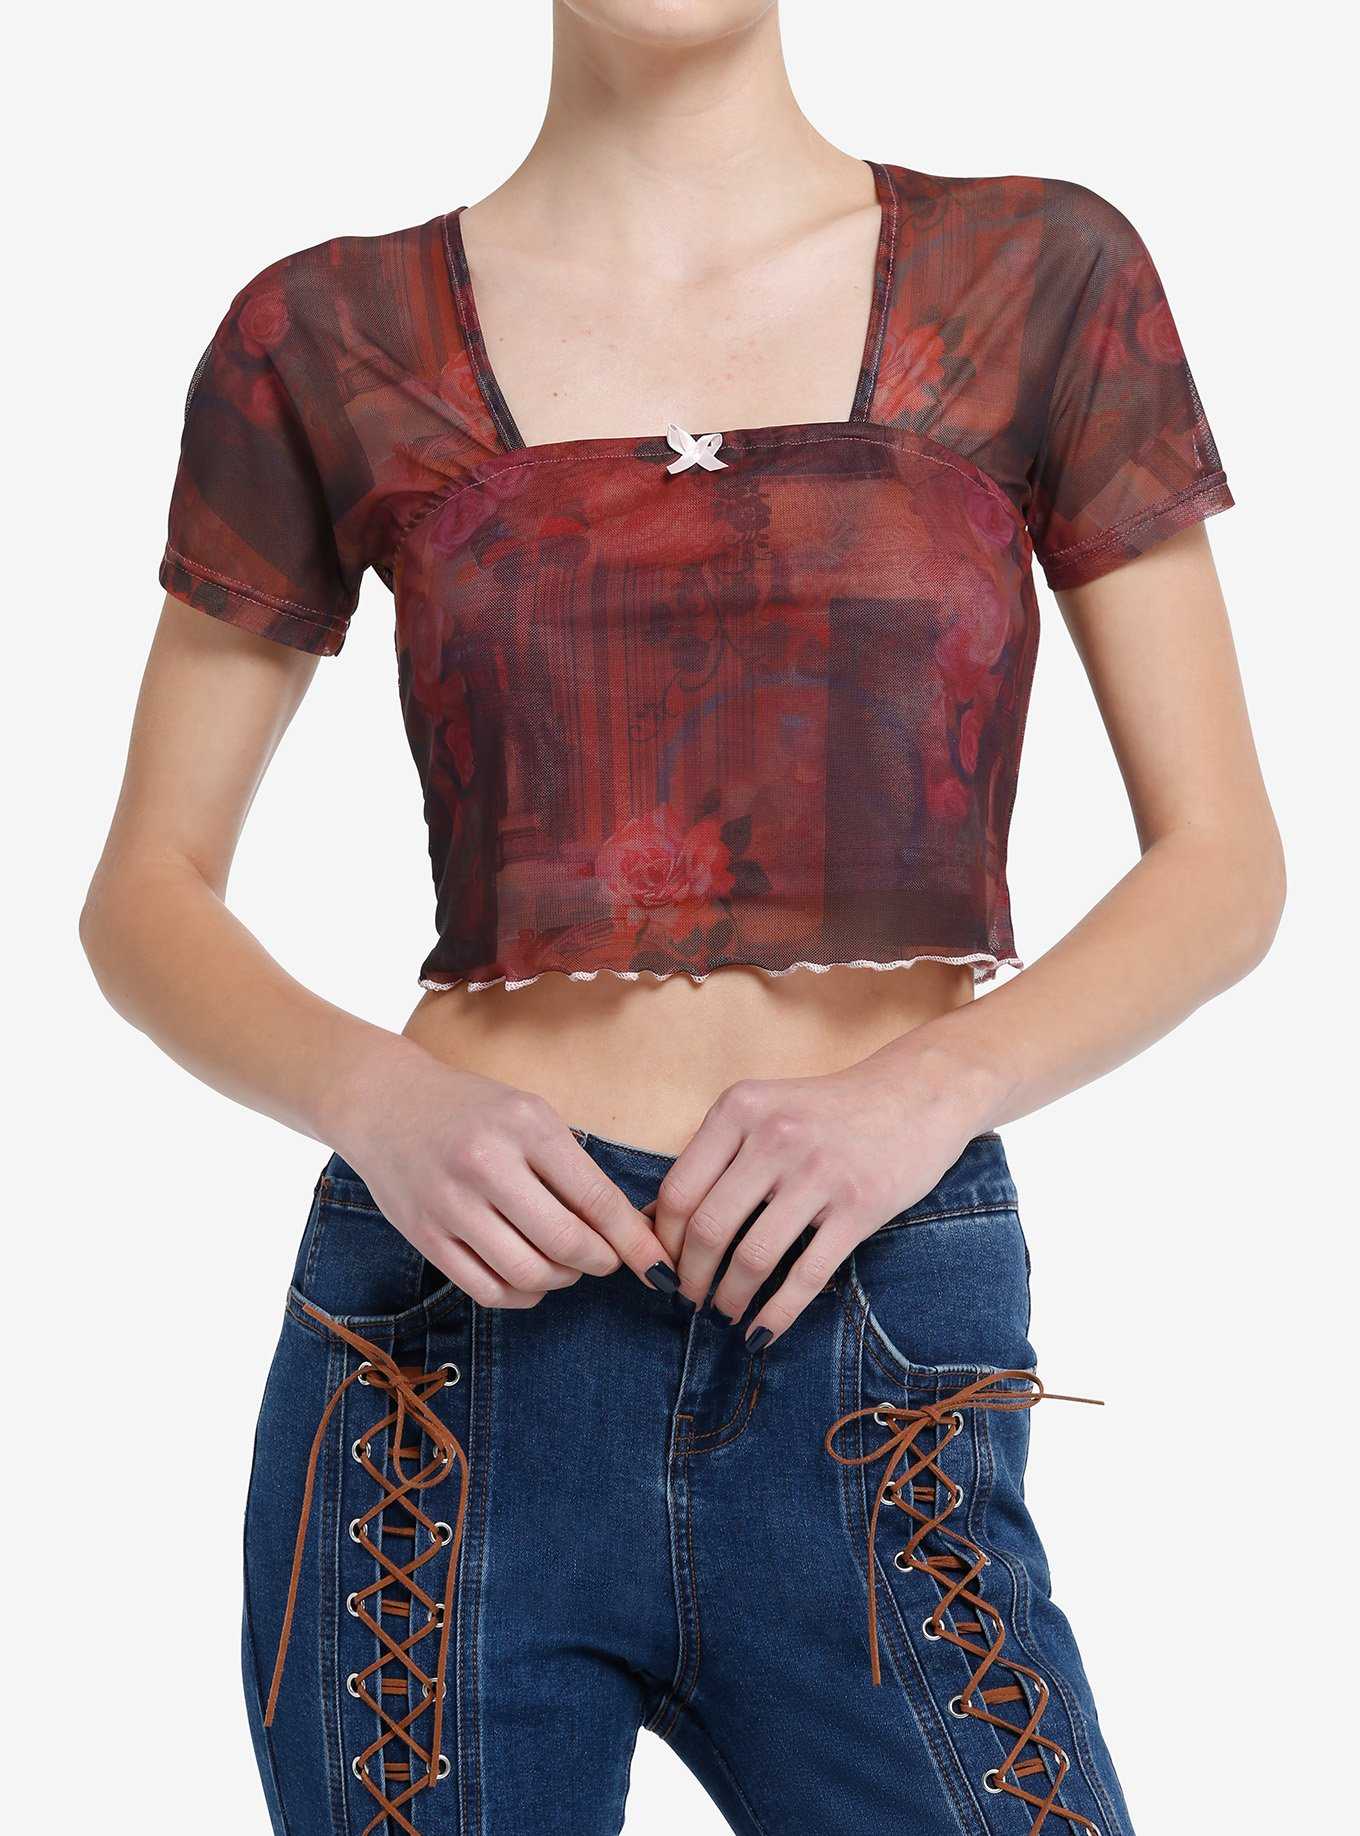 Social Collision Red & Black Rose Butterfly Mesh Girls Crop Top, , hi-res